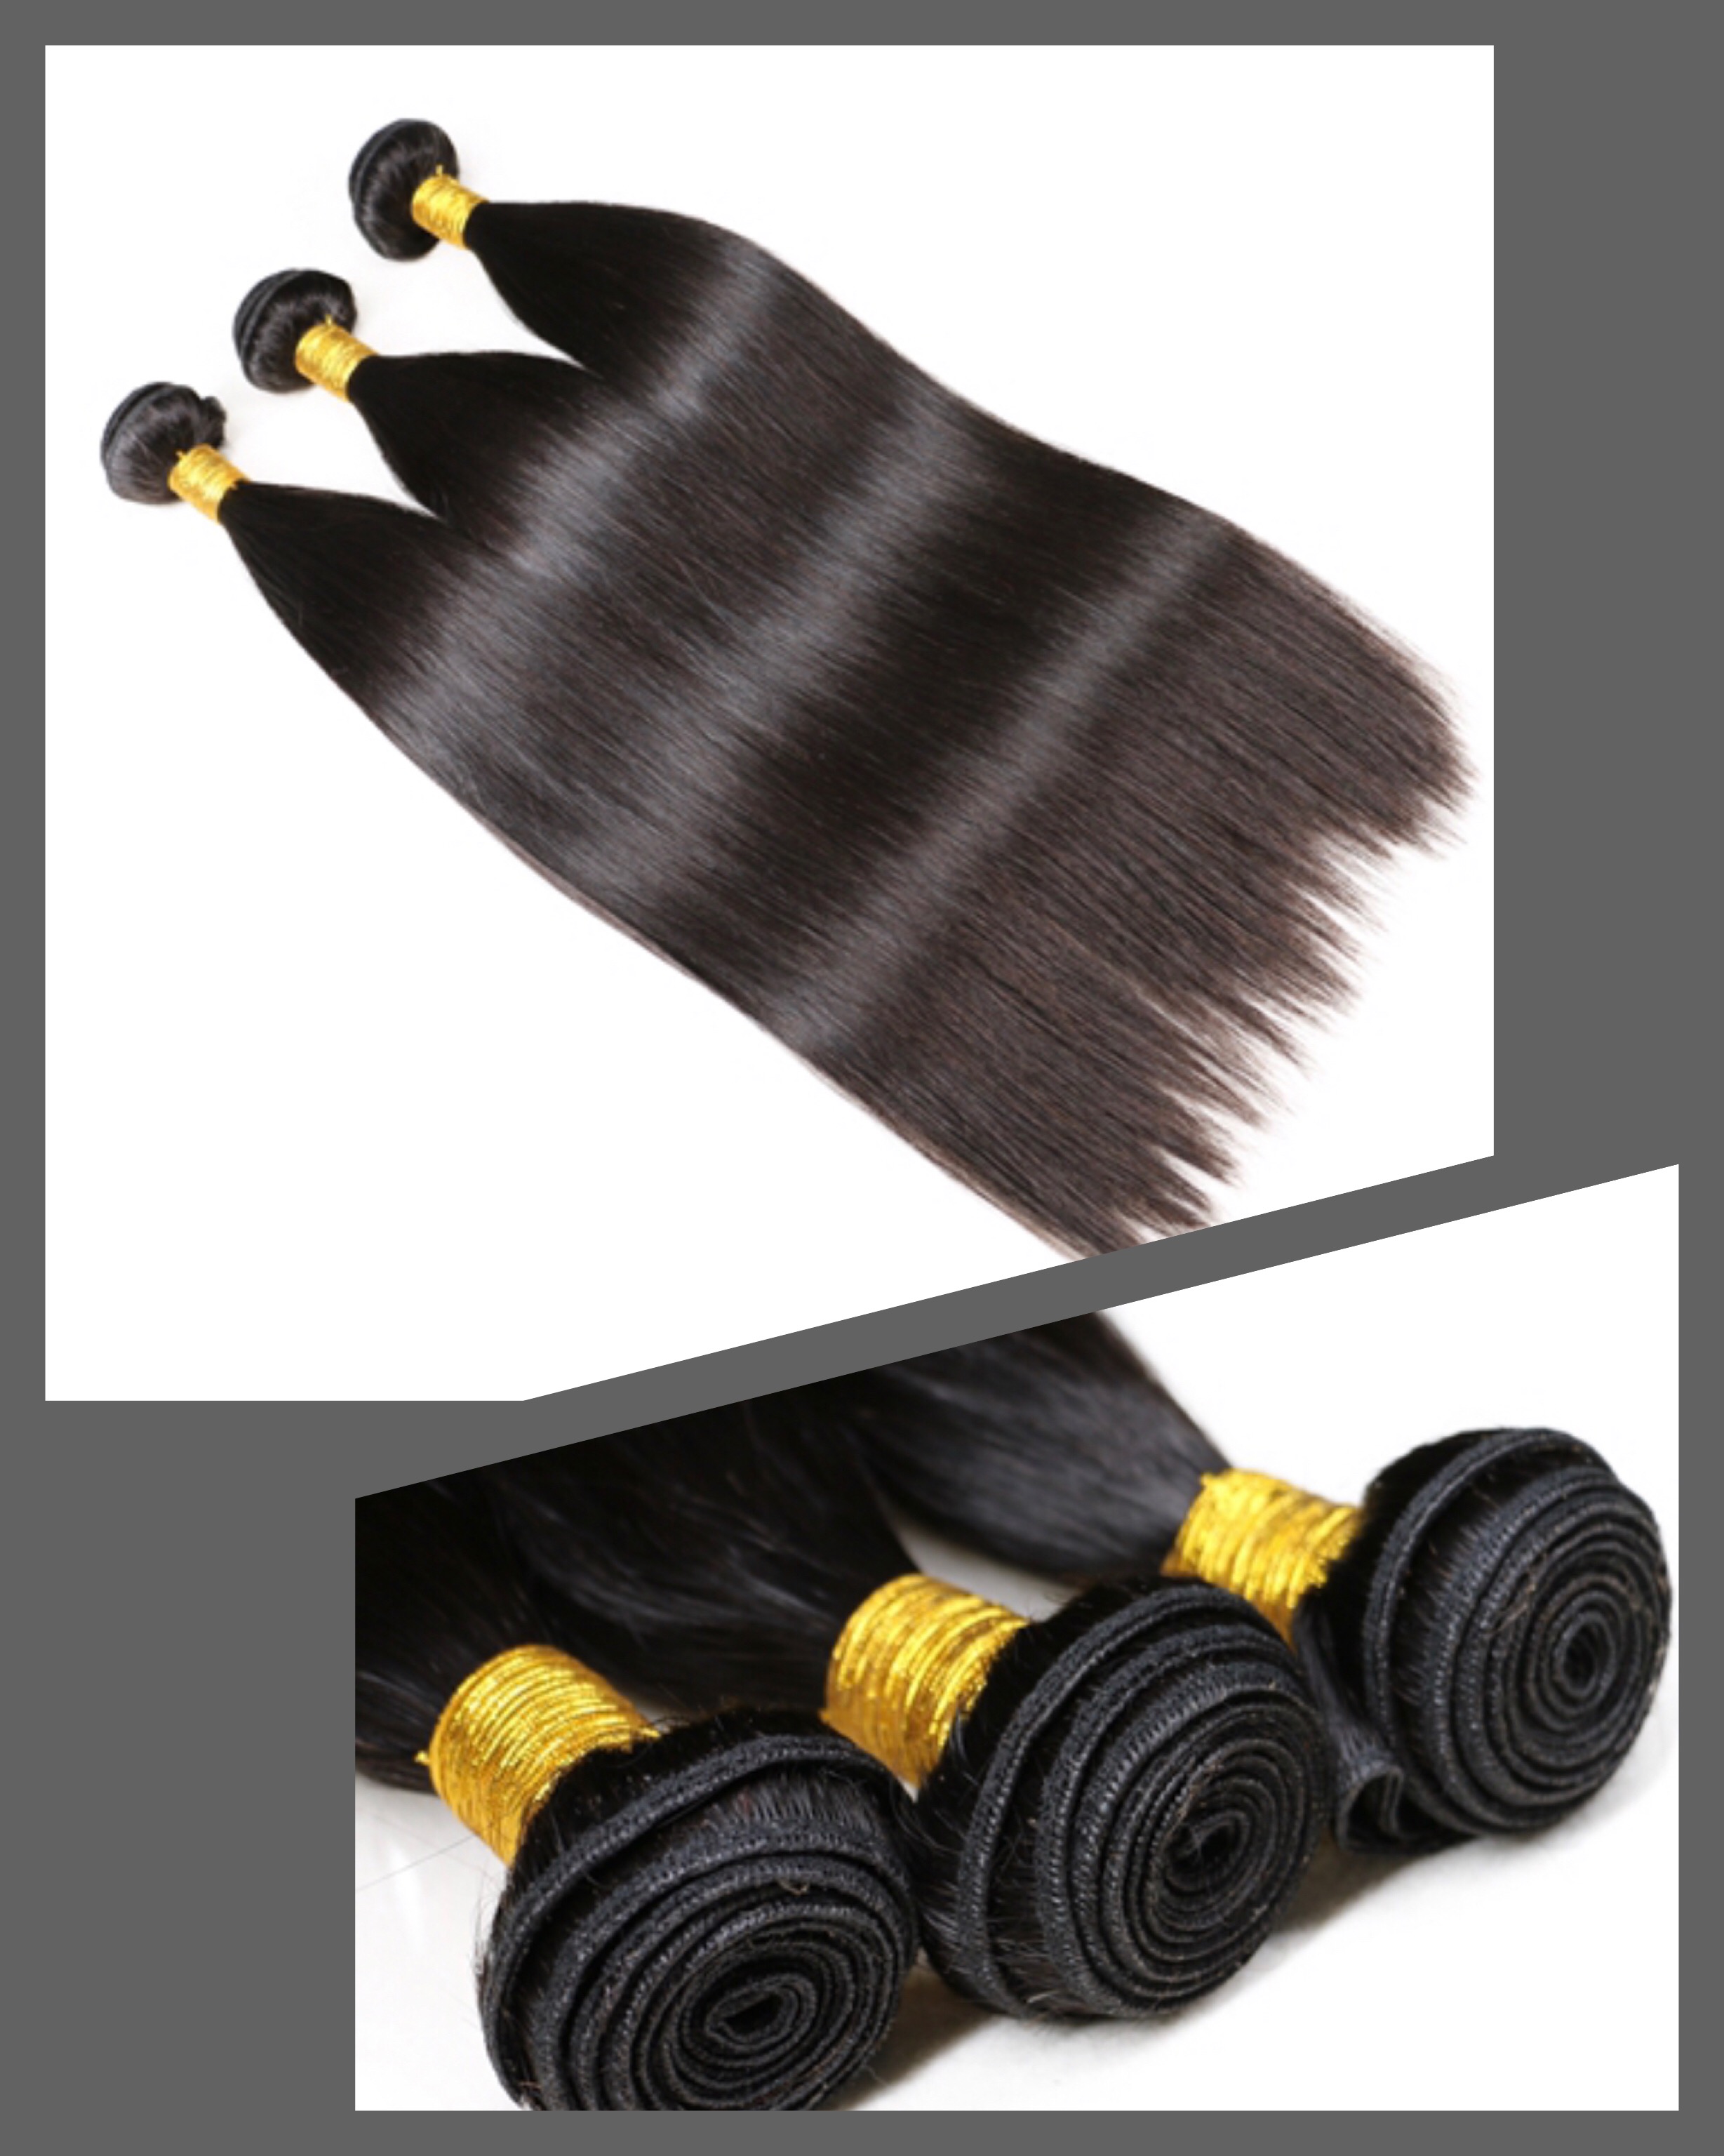 Top tips on how to buy Hair Extensions - Prestige Hair Extensions